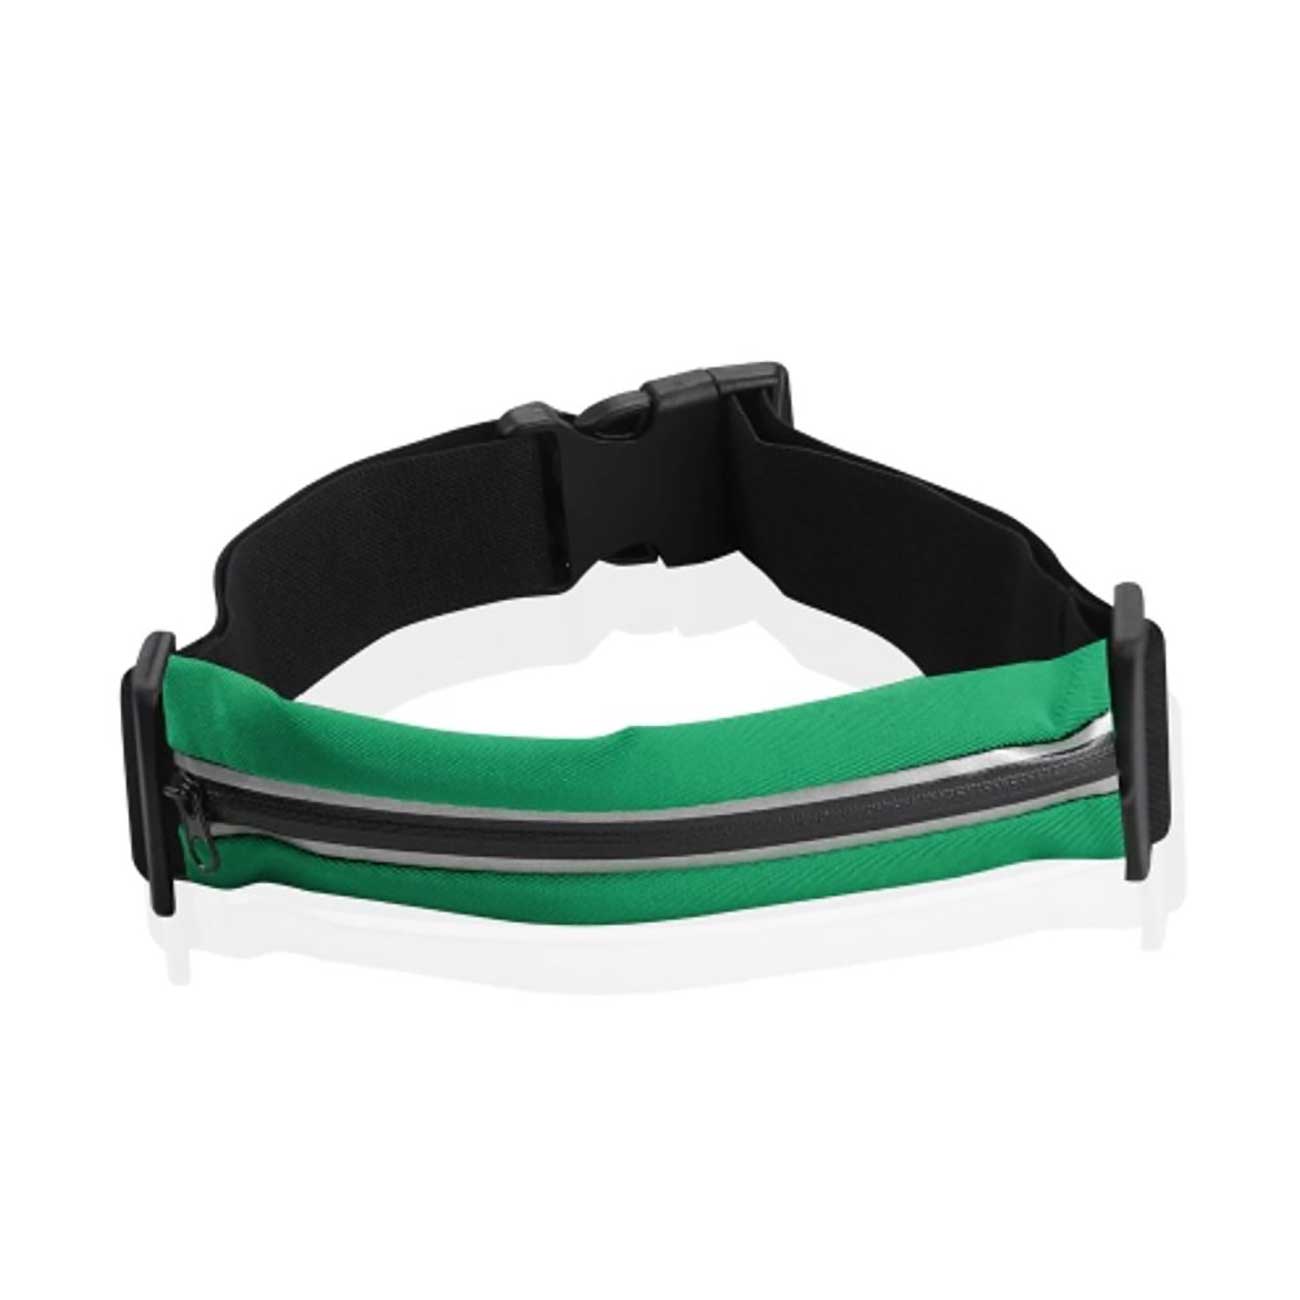 REIKO SPORTS STRETCH HIP WAIST PACK 7.87X1.77X1.77 INCHES INCHES IN GREEN